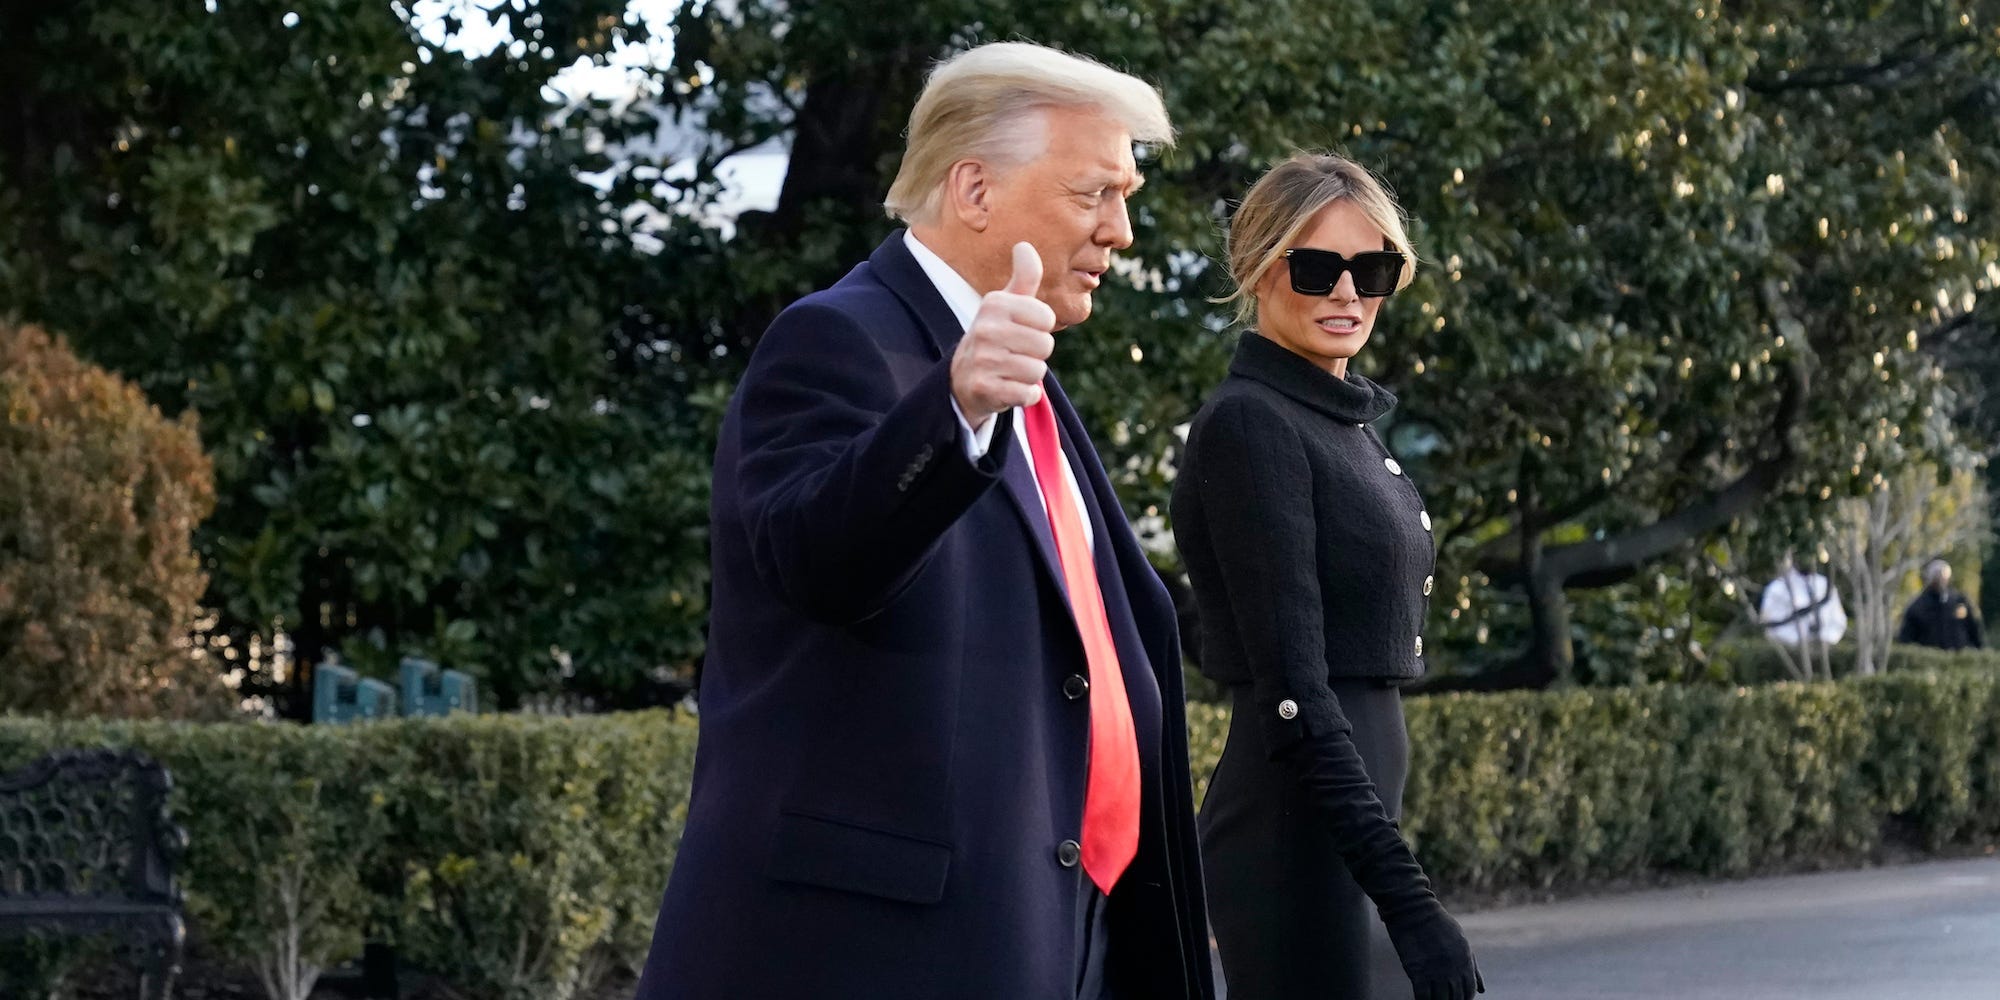 President Donald Trump and first lady Melania Trump walk to board Marine One on the South Lawn of the White House, Wednesday, Jan. 20, 2021, in Washington. Trump is en route to his Mar-a-Lago Florida Resort. (